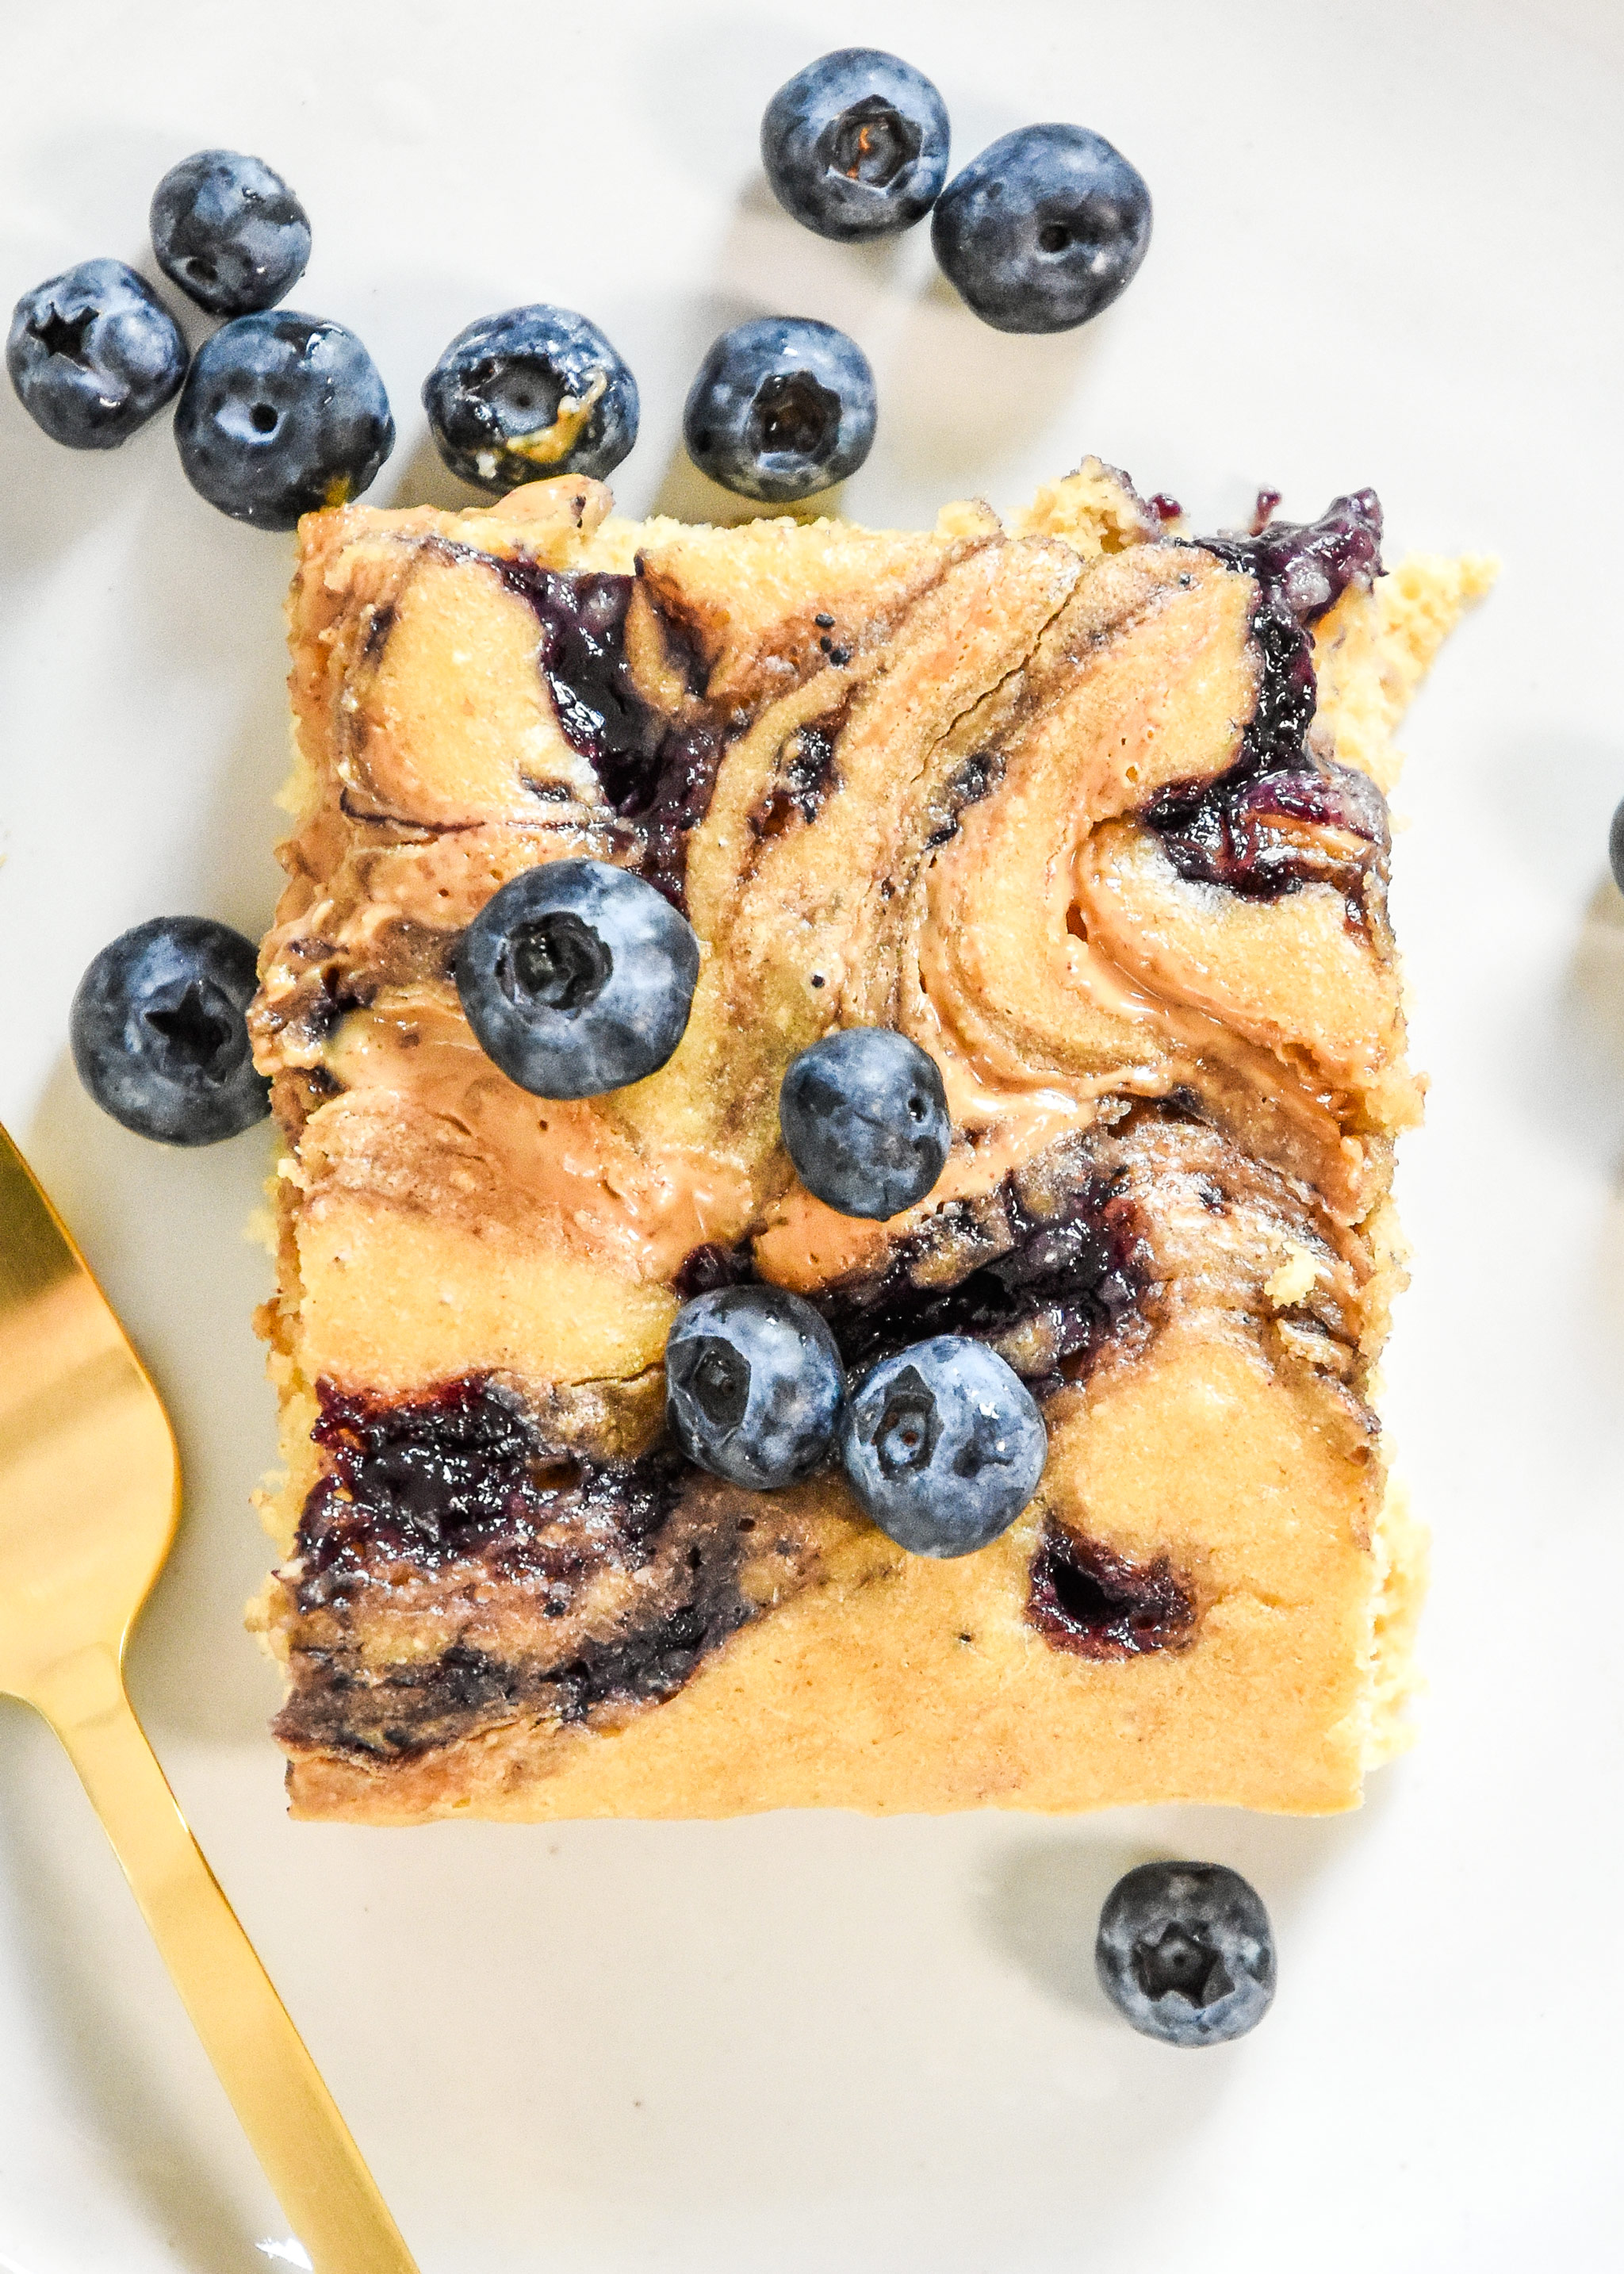 a perfect slice of peanut butter and jelly baked pancakes with blueberries on top